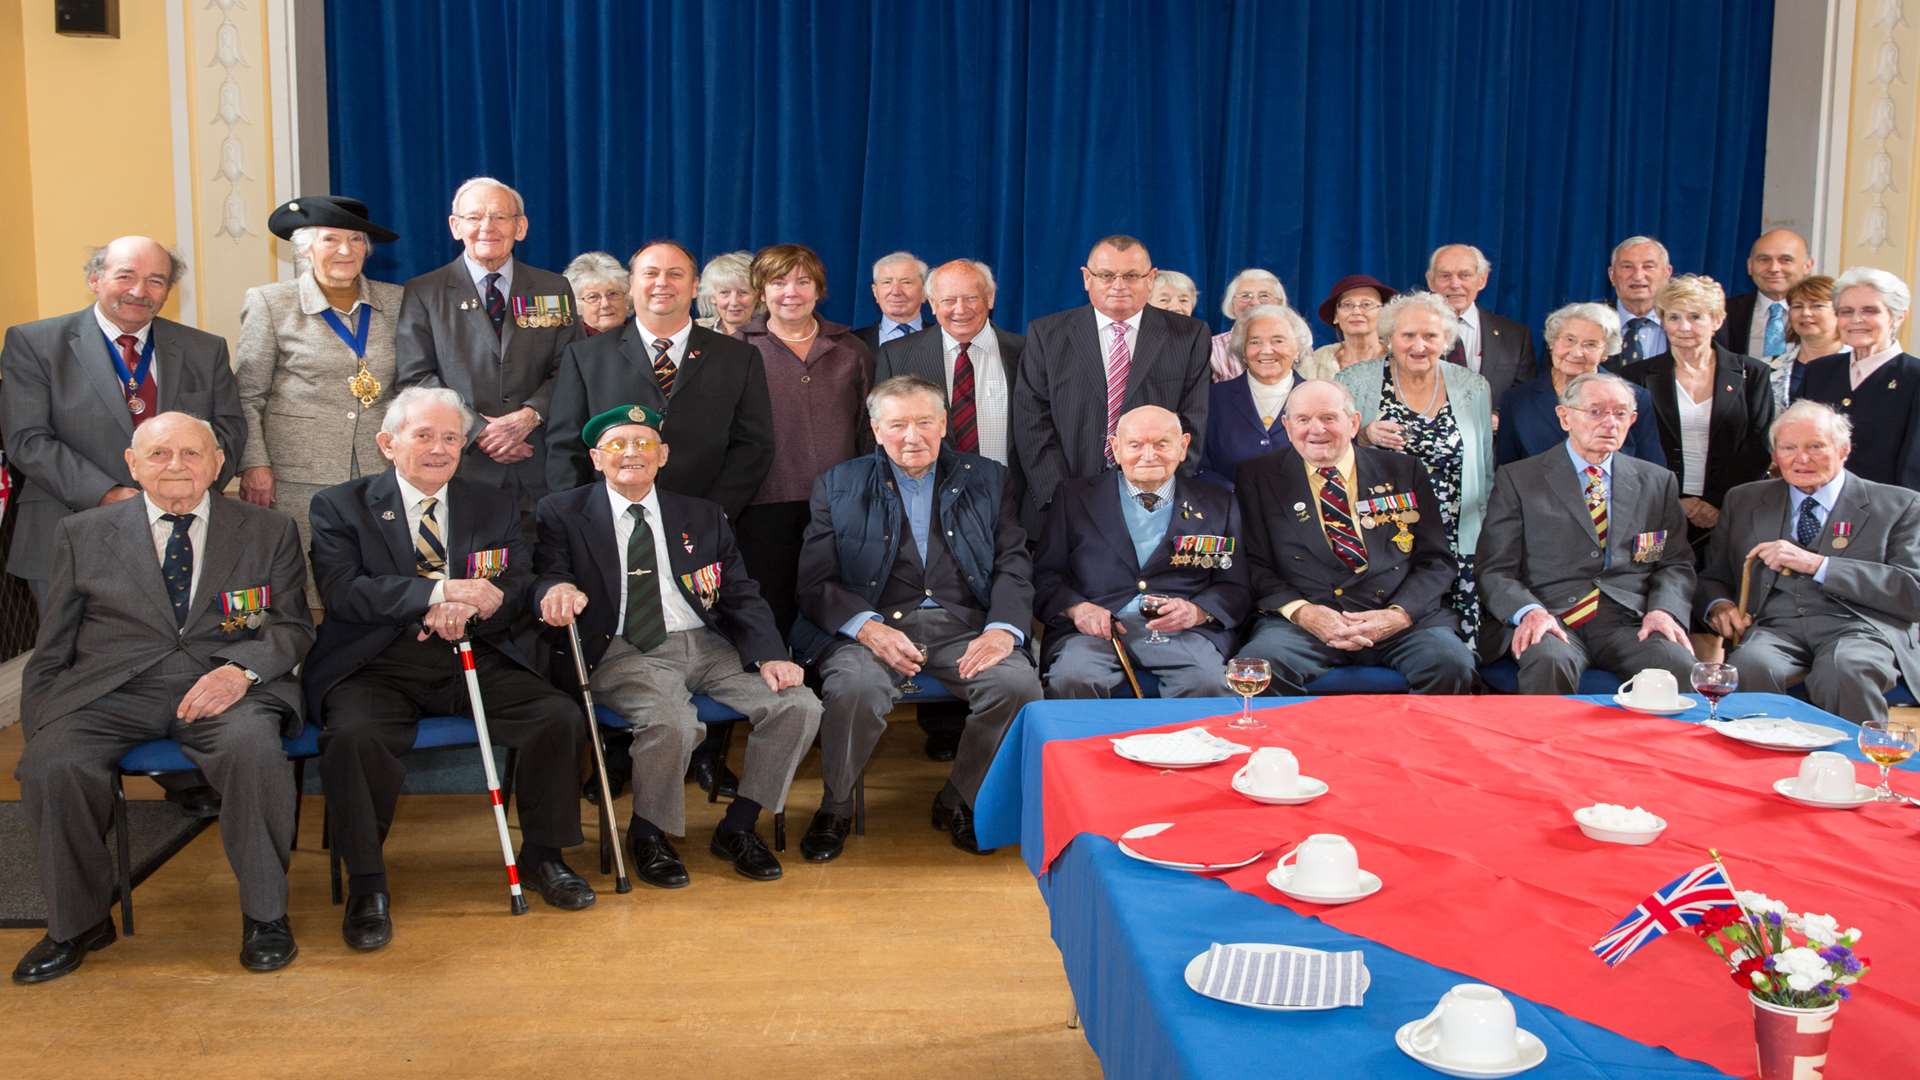 Veterans and guests who attended the VE Day 70th anniversary lunch in Tenterden town hall. Picture: Stuart Kirk, Tenterden Photography.